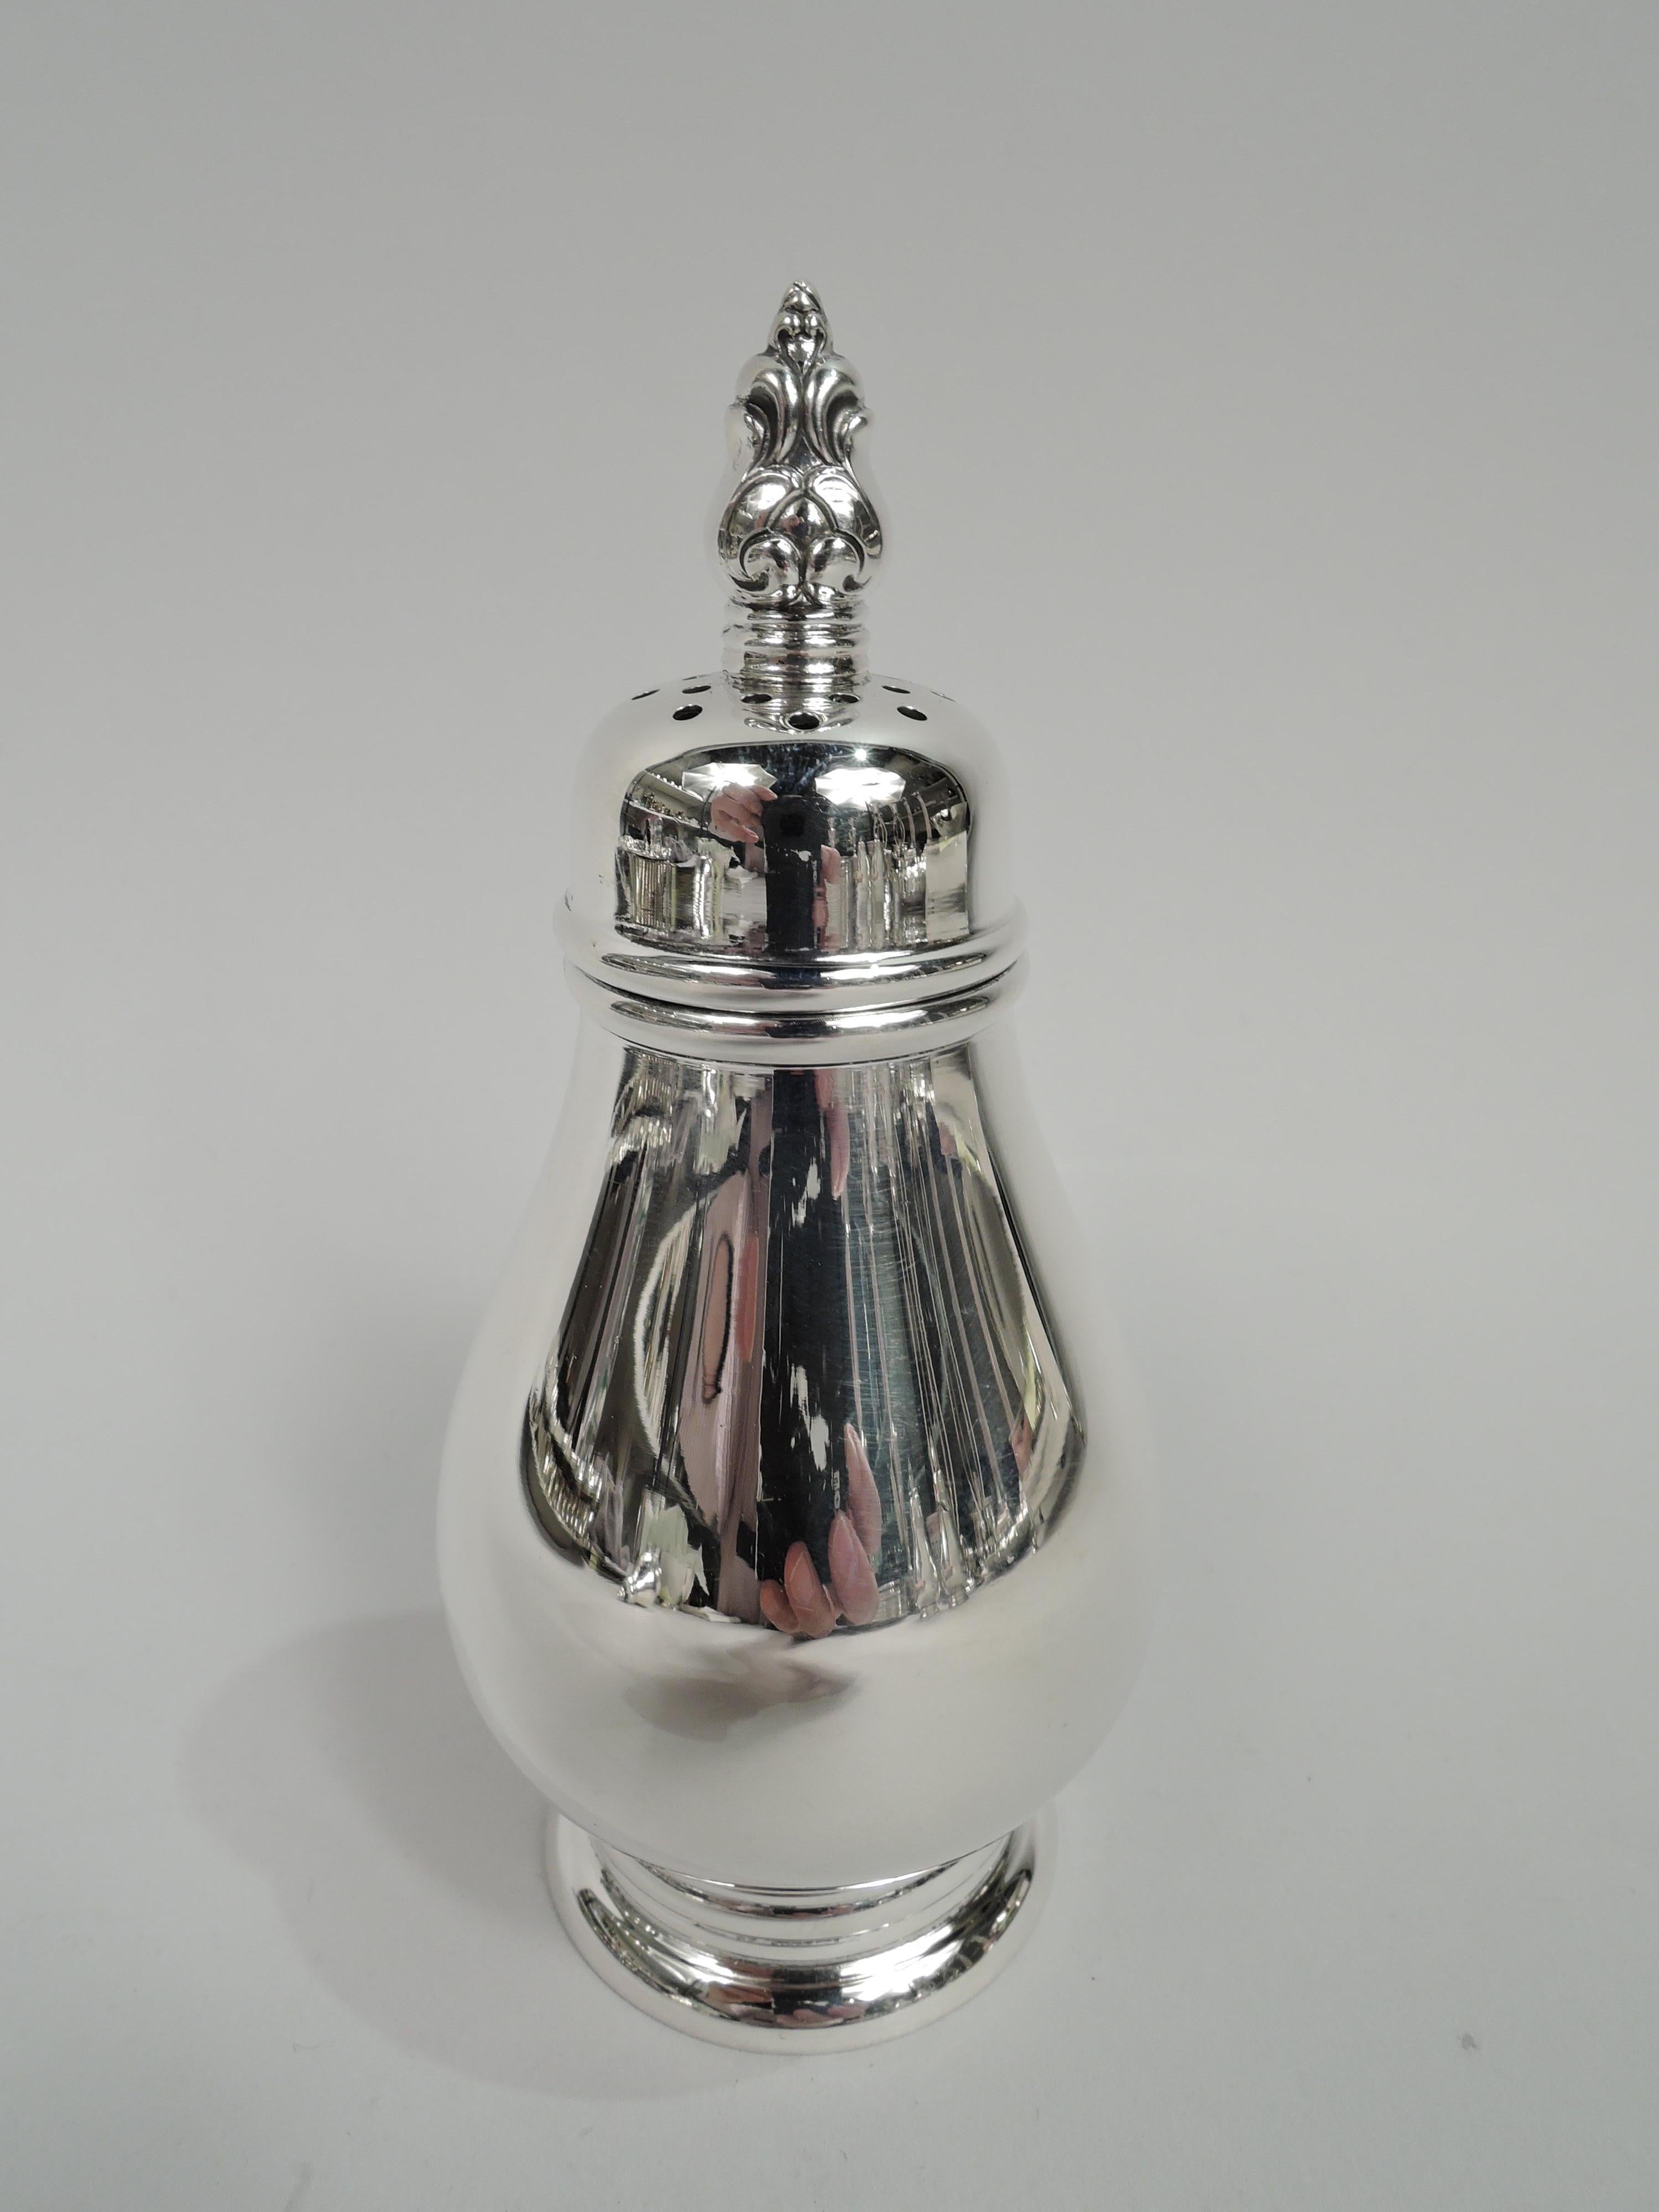 Pair of Royal Danish sterling silver salt and pepper shakers. Made by International in Meriden, Conn. Each: Baluster on raised foot with concentric bands. Cover pierced top and scroll and acorn finial. Fully marked including maker’s stamp, pattern